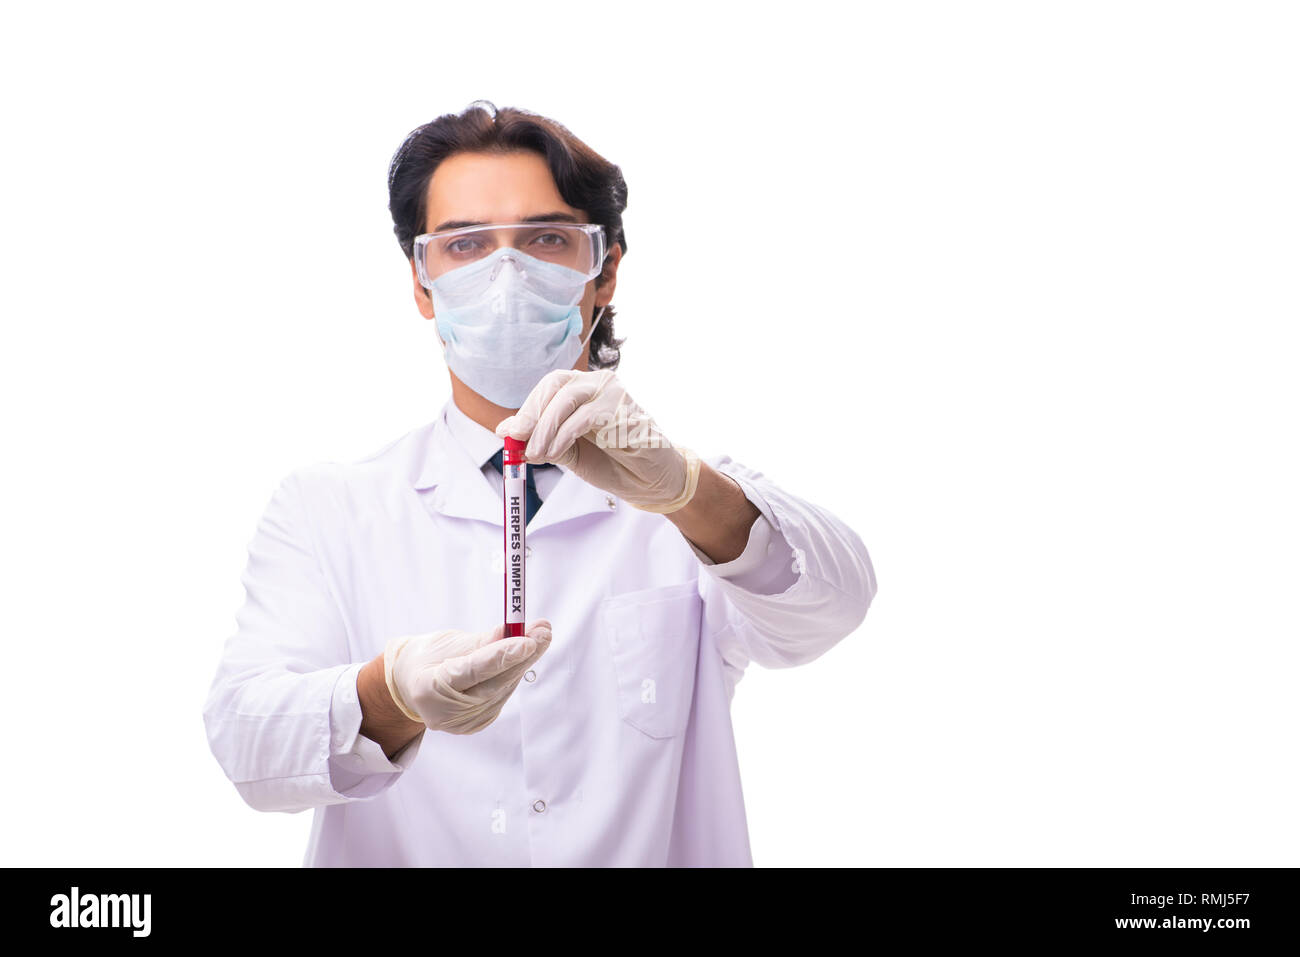 Young chemist isolated on white background Stock Photo